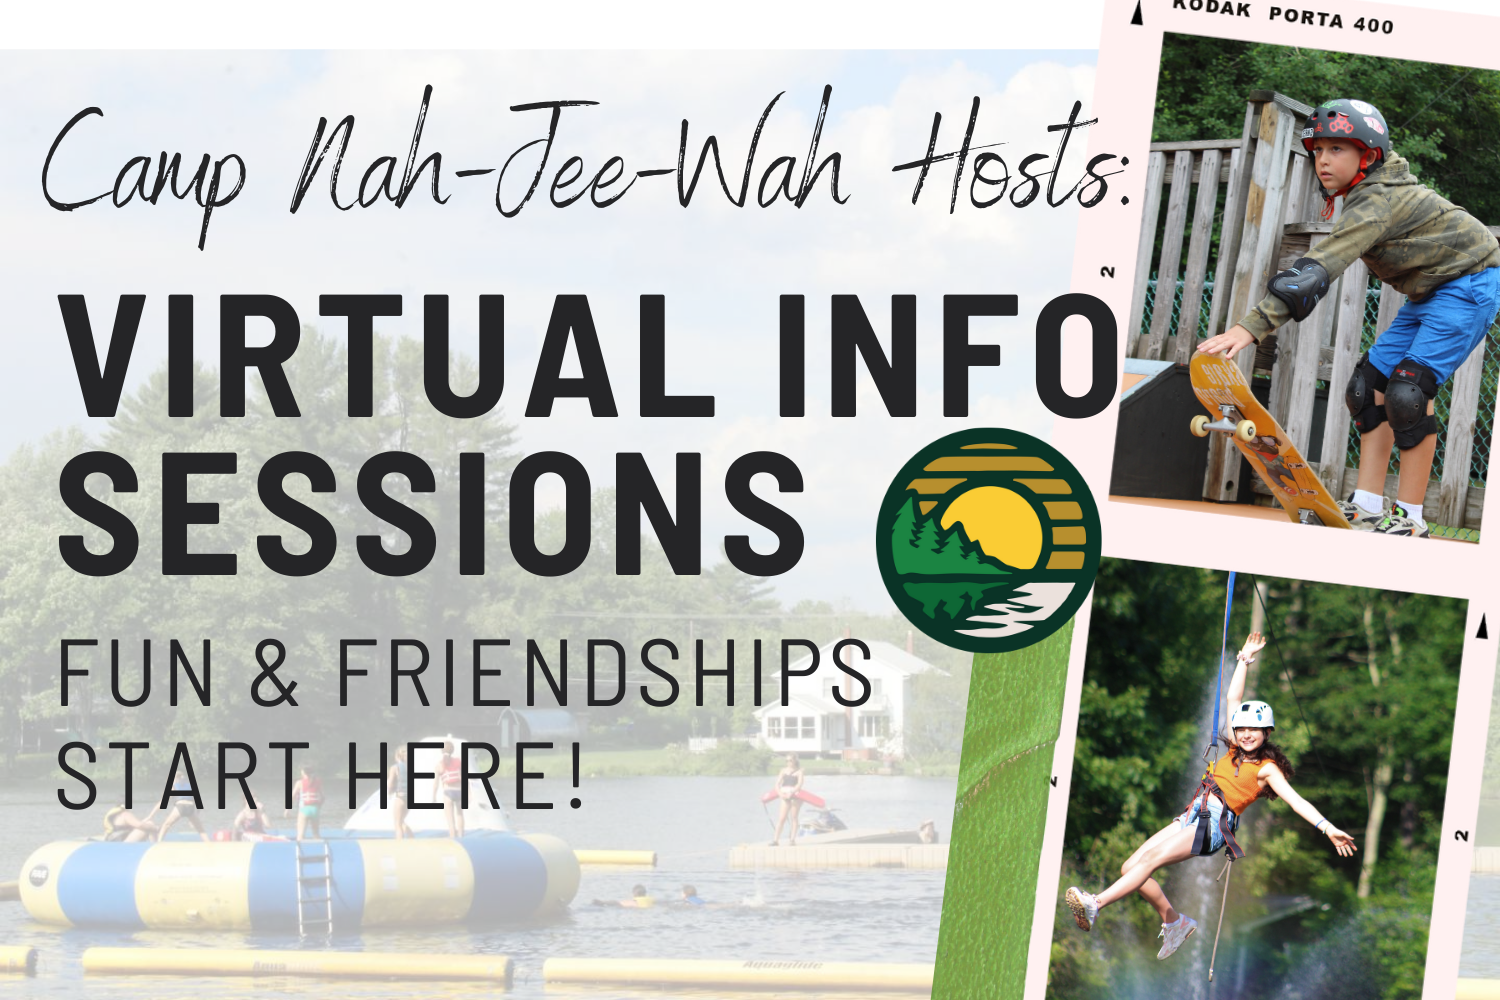 Join us for a Virtual Info Session!